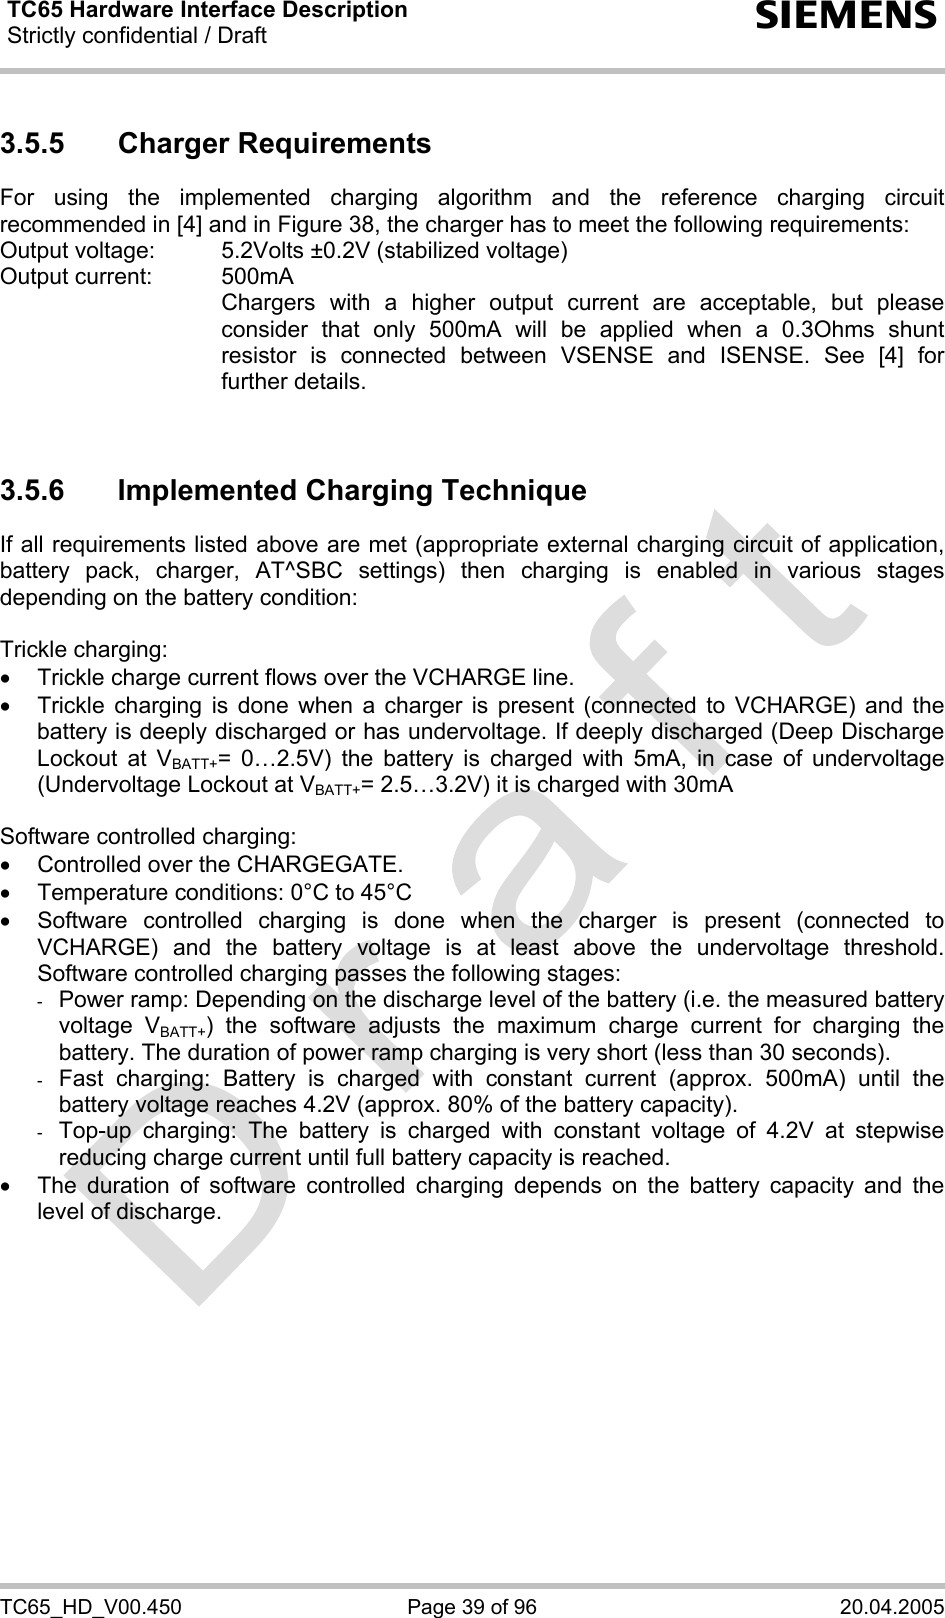 TC65 Hardware Interface Description Strictly confidential / Draft  s TC65_HD_V00.450  Page 39 of 96  20.04.2005 3.5.5 Charger Requirements For using the implemented charging algorithm and the reference charging circuit recommended in [4] and in Figure 38, the charger has to meet the following requirements: Output voltage:   5.2Volts ±0.2V (stabilized voltage) Output current:   500mA     Chargers with a higher output current are acceptable, but please consider that only 500mA will be applied when a 0.3Ohms shunt resistor is connected between VSENSE and ISENSE. See [4] for further details.   3.5.6  Implemented Charging Technique If all requirements listed above are met (appropriate external charging circuit of application, battery pack, charger, AT^SBC settings) then charging is enabled in various stages depending on the battery condition:  Trickle charging: •  Trickle charge current flows over the VCHARGE line. •  Trickle charging is done when a charger is present (connected to VCHARGE) and the battery is deeply discharged or has undervoltage. If deeply discharged (Deep Discharge Lockout at VBATT+= 0…2.5V) the battery is charged with 5mA, in case of undervoltage (Undervoltage Lockout at VBATT+= 2.5…3.2V) it is charged with 30mA  Software controlled charging: •  Controlled over the CHARGEGATE. •  Temperature conditions: 0°C to 45°C •  Software controlled charging is done when the charger is present (connected to VCHARGE) and the battery voltage is at least above the undervoltage threshold. Software controlled charging passes the following stages: -  Power ramp: Depending on the discharge level of the battery (i.e. the measured battery voltage VBATT+) the software adjusts the maximum charge current for charging the battery. The duration of power ramp charging is very short (less than 30 seconds). -  Fast charging: Battery is charged with constant current (approx. 500mA) until the battery voltage reaches 4.2V (approx. 80% of the battery capacity).  -  Top-up charging: The battery is charged with constant voltage of 4.2V at stepwise reducing charge current until full battery capacity is reached.  •  The duration of software controlled charging depends on the battery capacity and the level of discharge.   